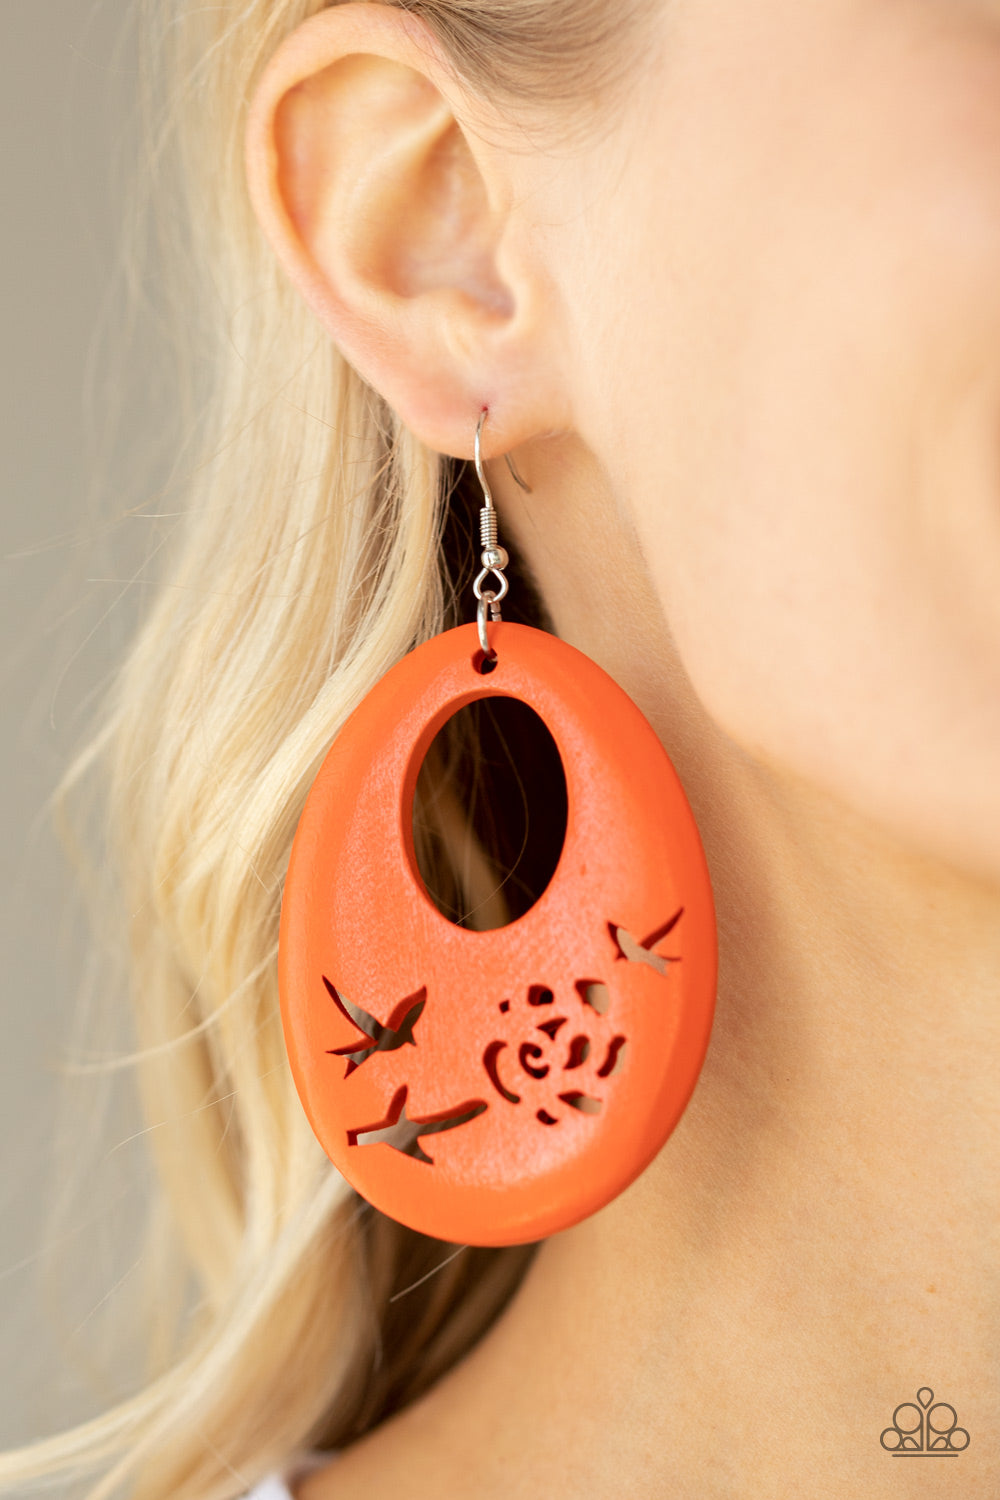 Home TWEET Home - Orange Wood Earrings the bottom of a vivacious orange wooden teardrop frame features bird and floral cutouts, creating a whimsical centerpiece. Earring attaches to a standard fishhook fitting.  Sold as one pair of earrings.